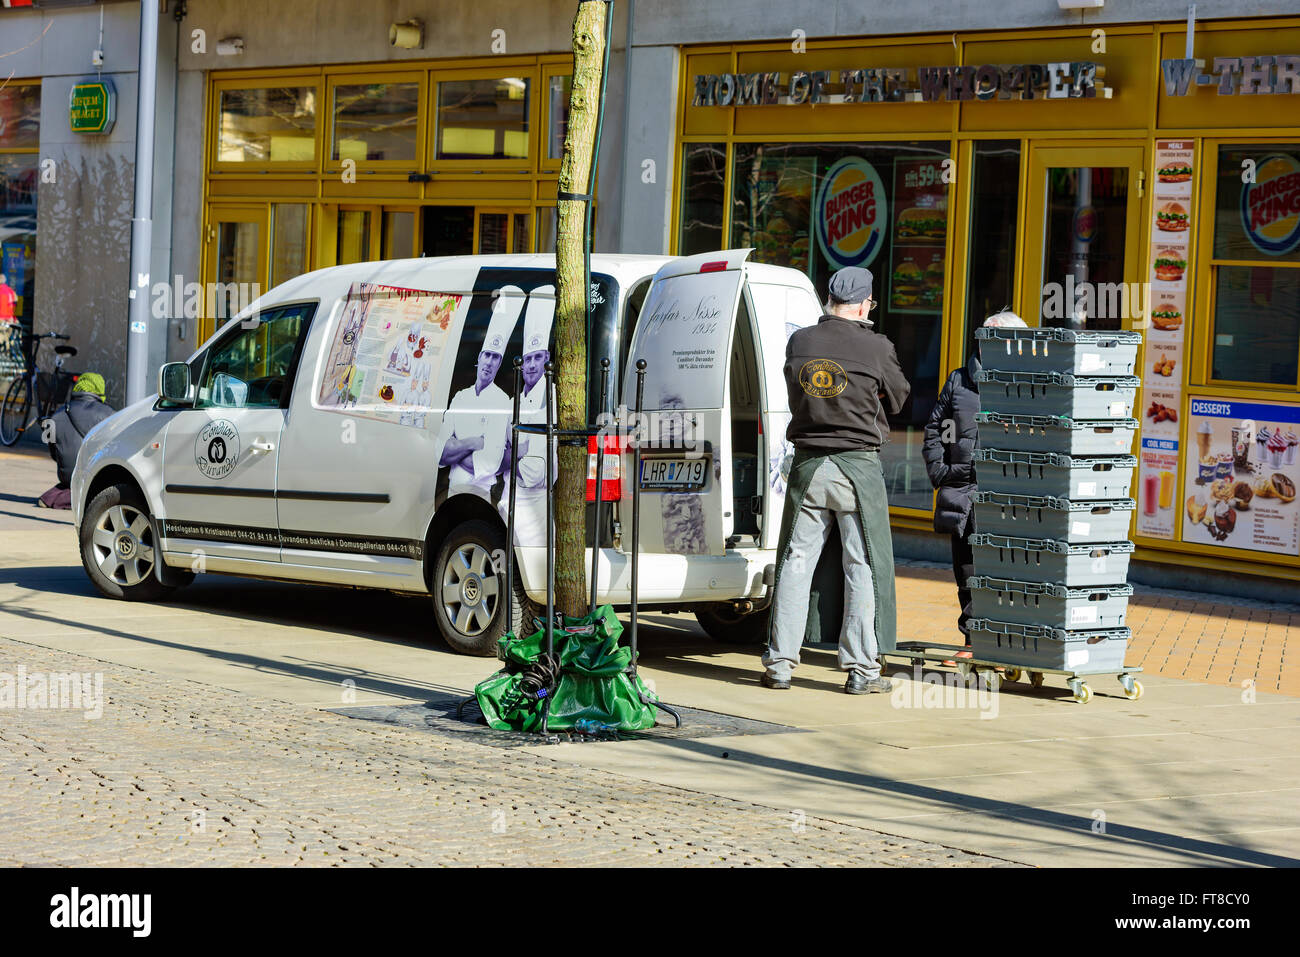 Kristianstad, Sweden - March 20, 2016: A male confectioner stand behind a delivery car and talk to a person behind some crates. Stock Photo